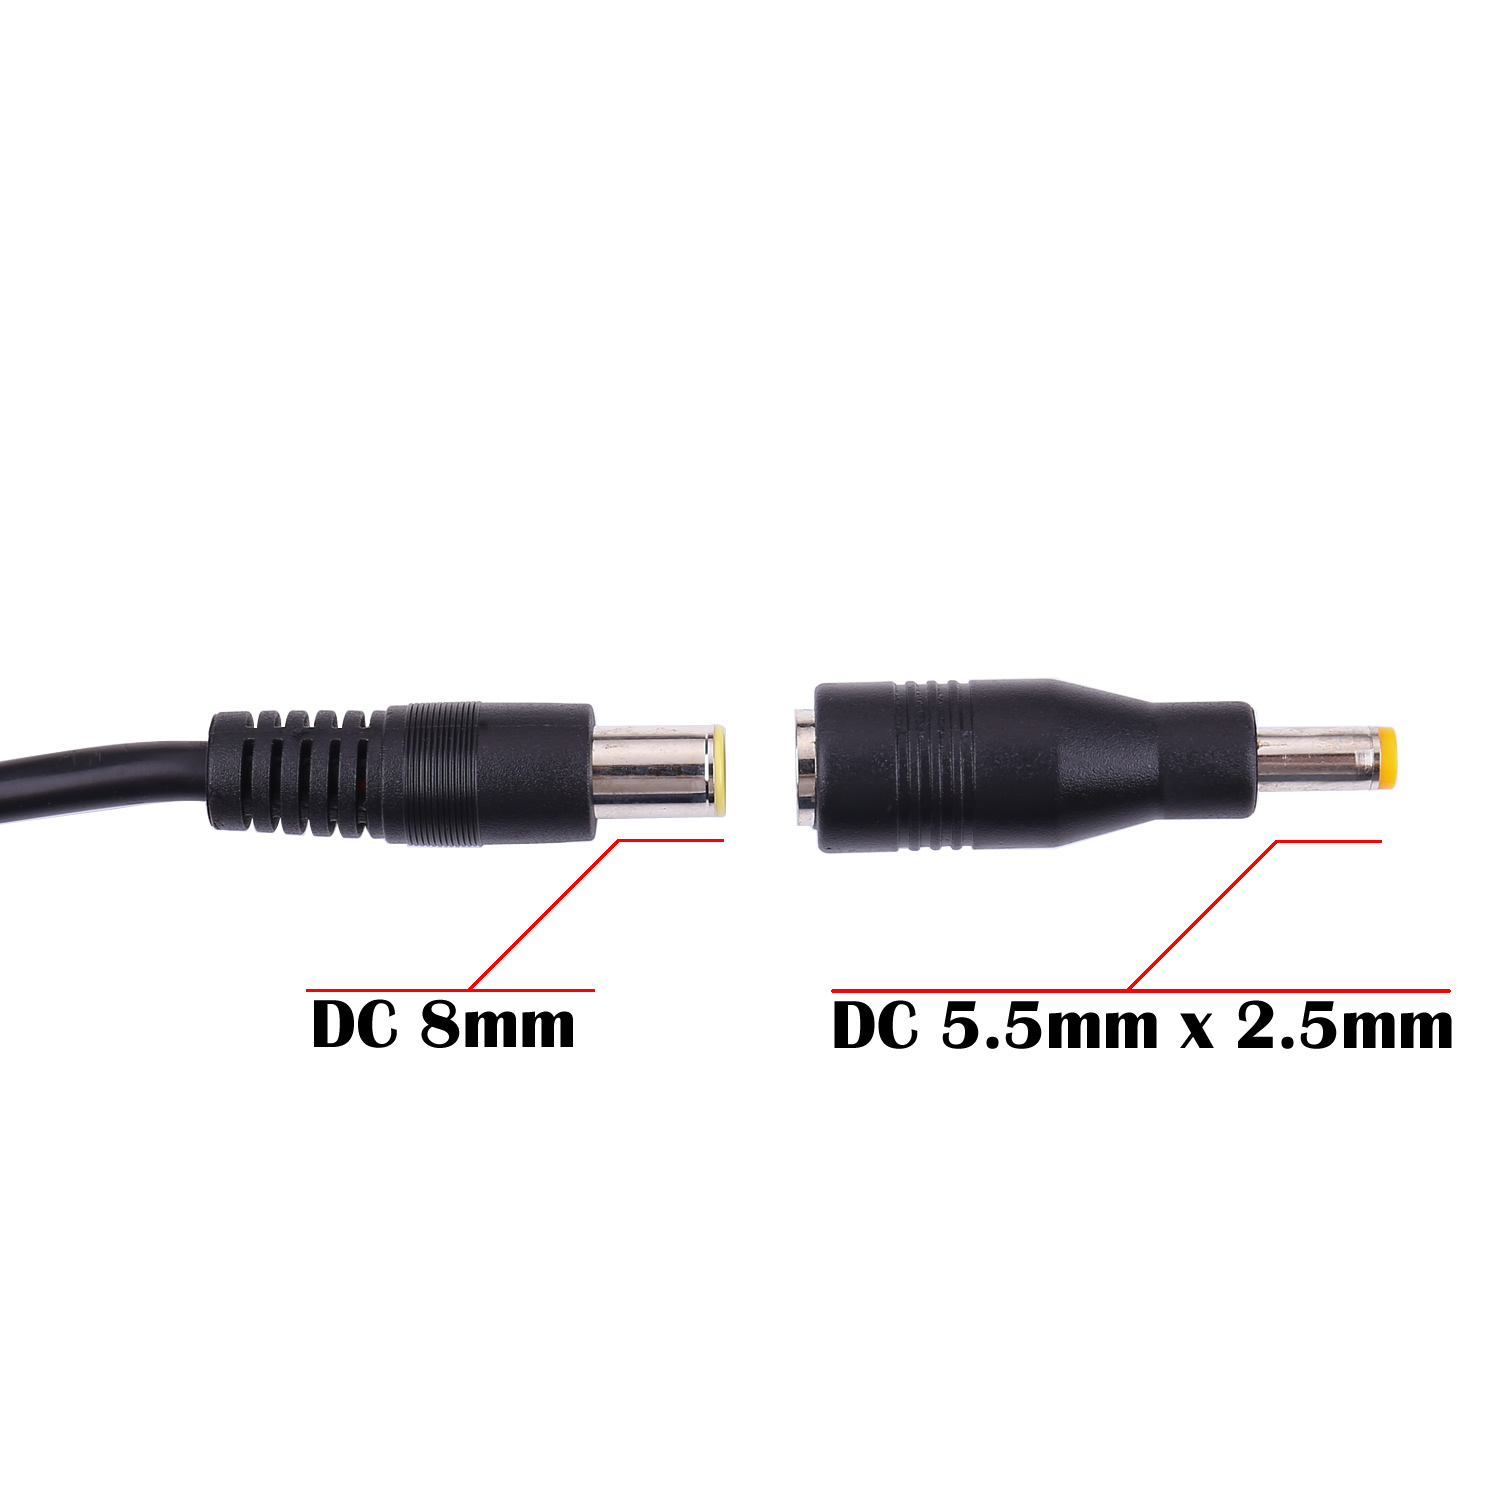 Dc4-70 denude cable 8-28mm